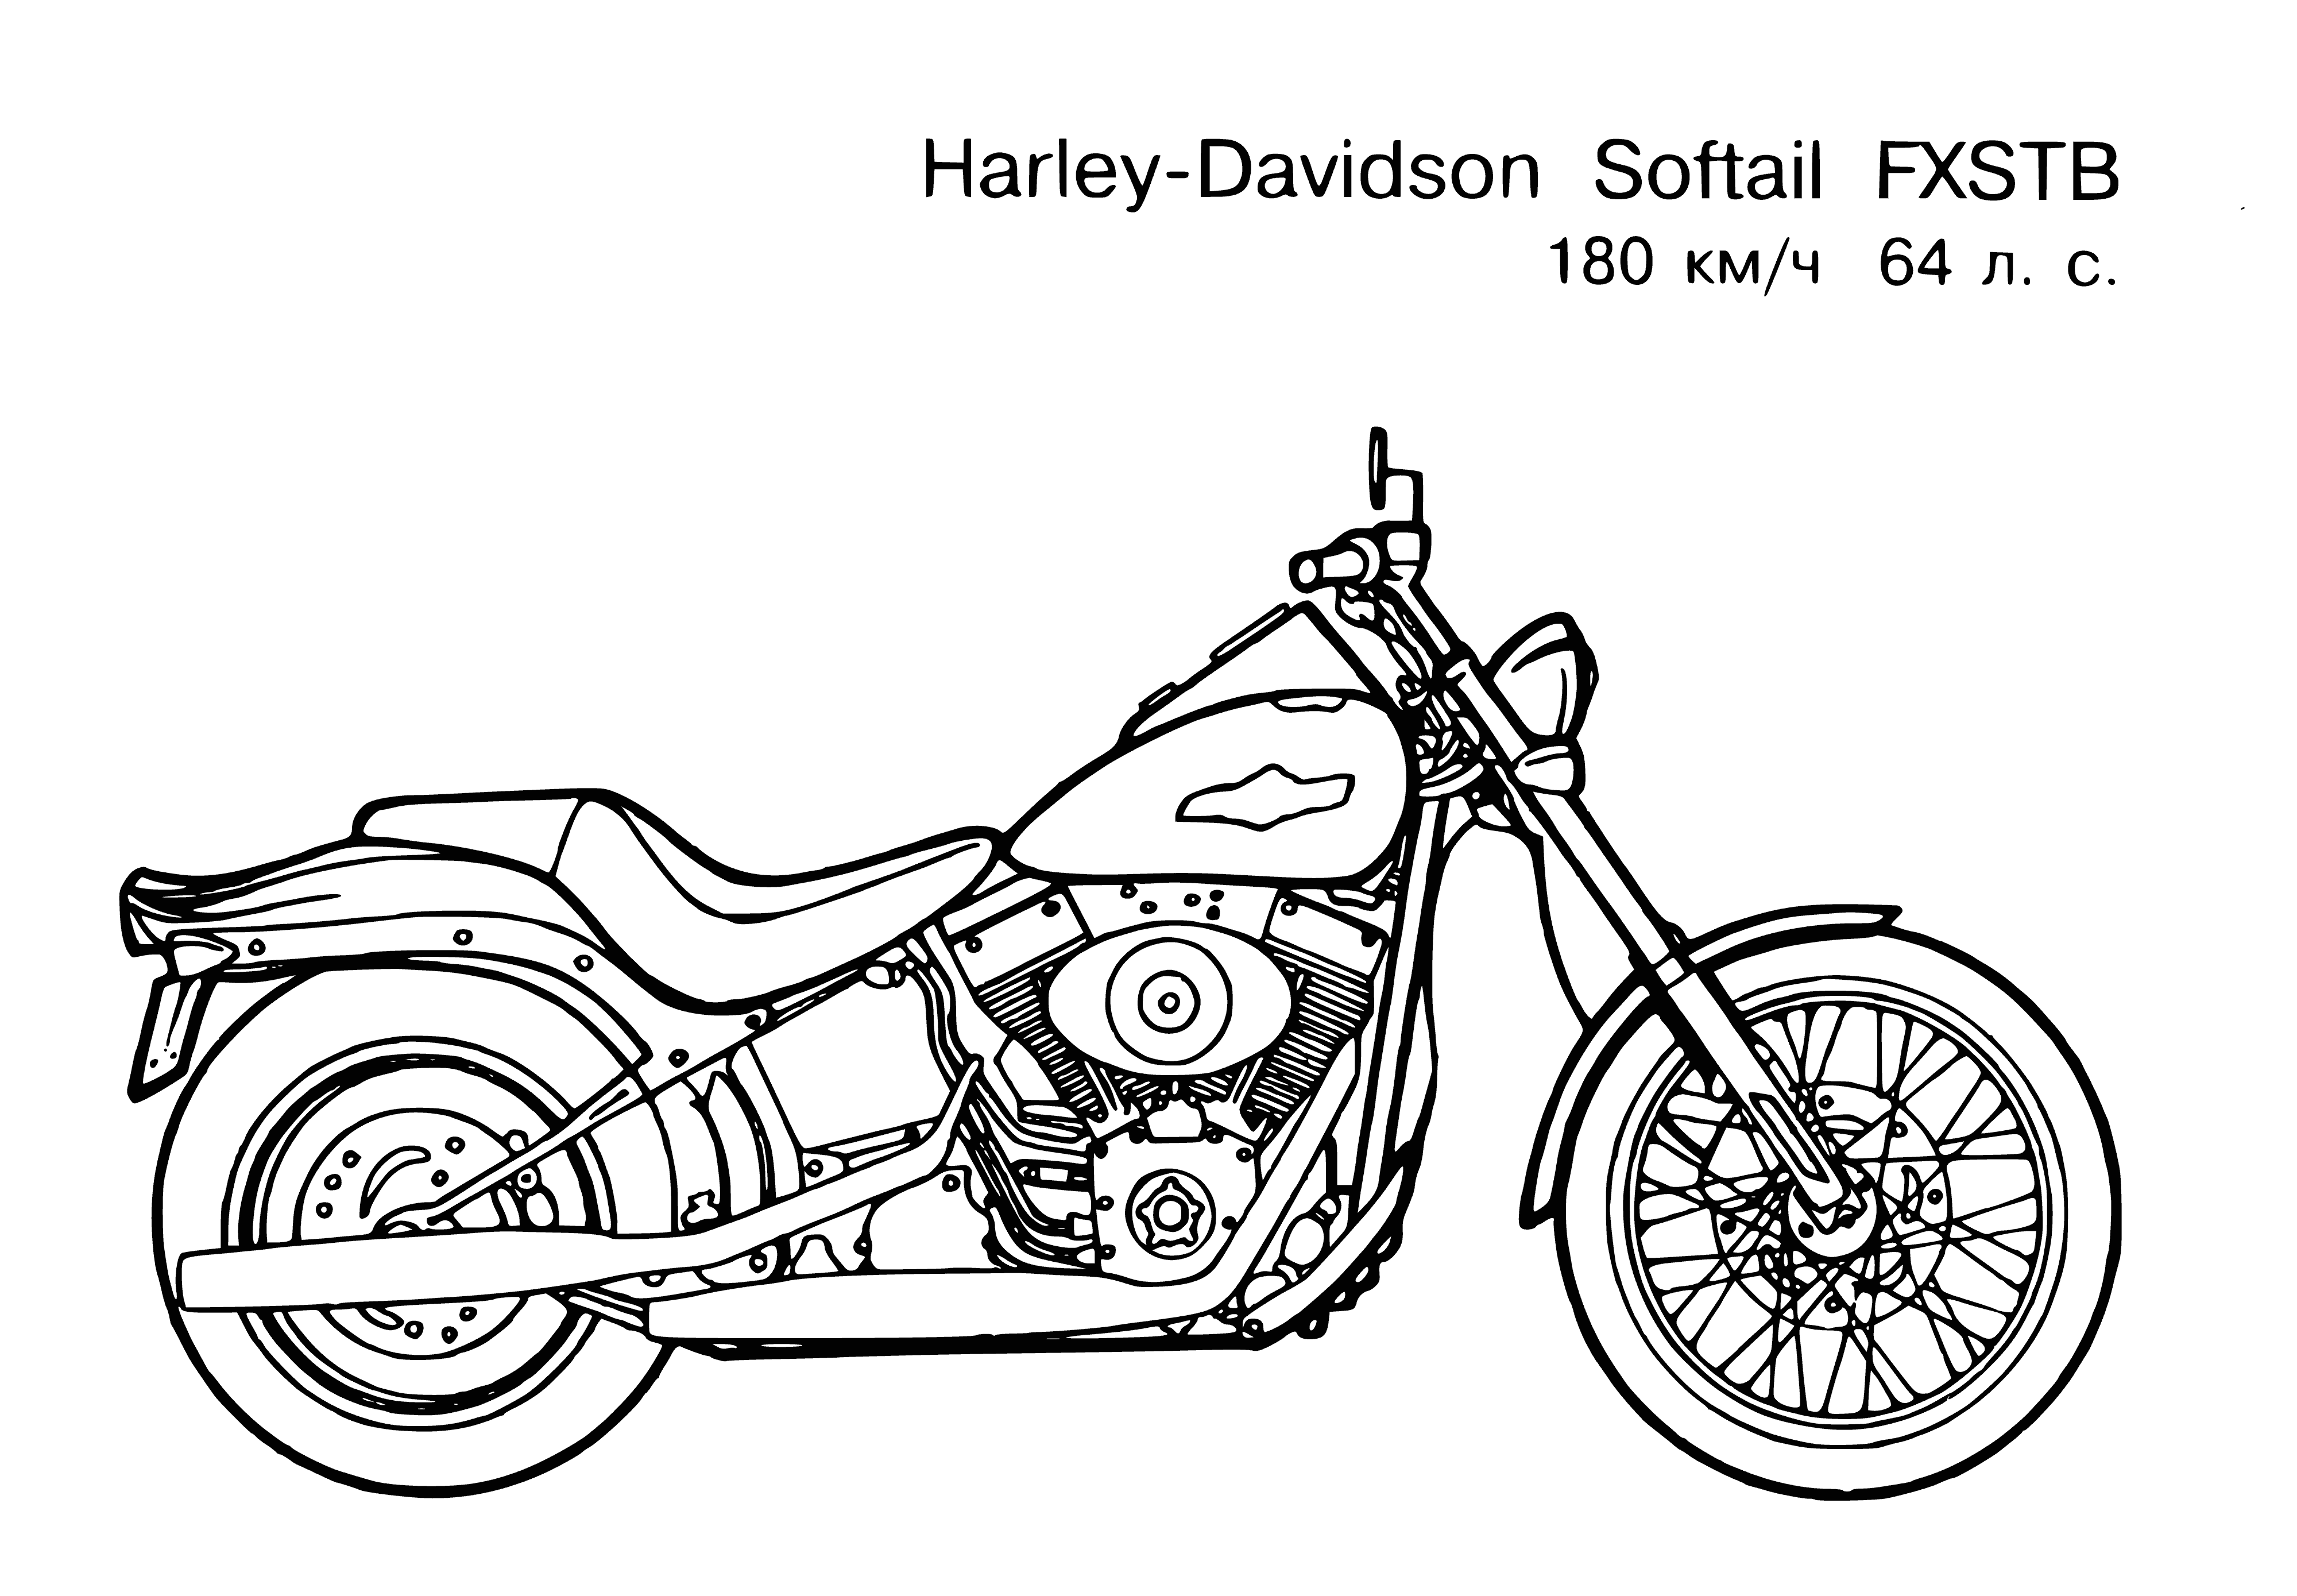 coloring page: => Coloring page features 2 silver motorcycles, "THOR" and "HOG" license plates, with chrome accents, parked on a street.